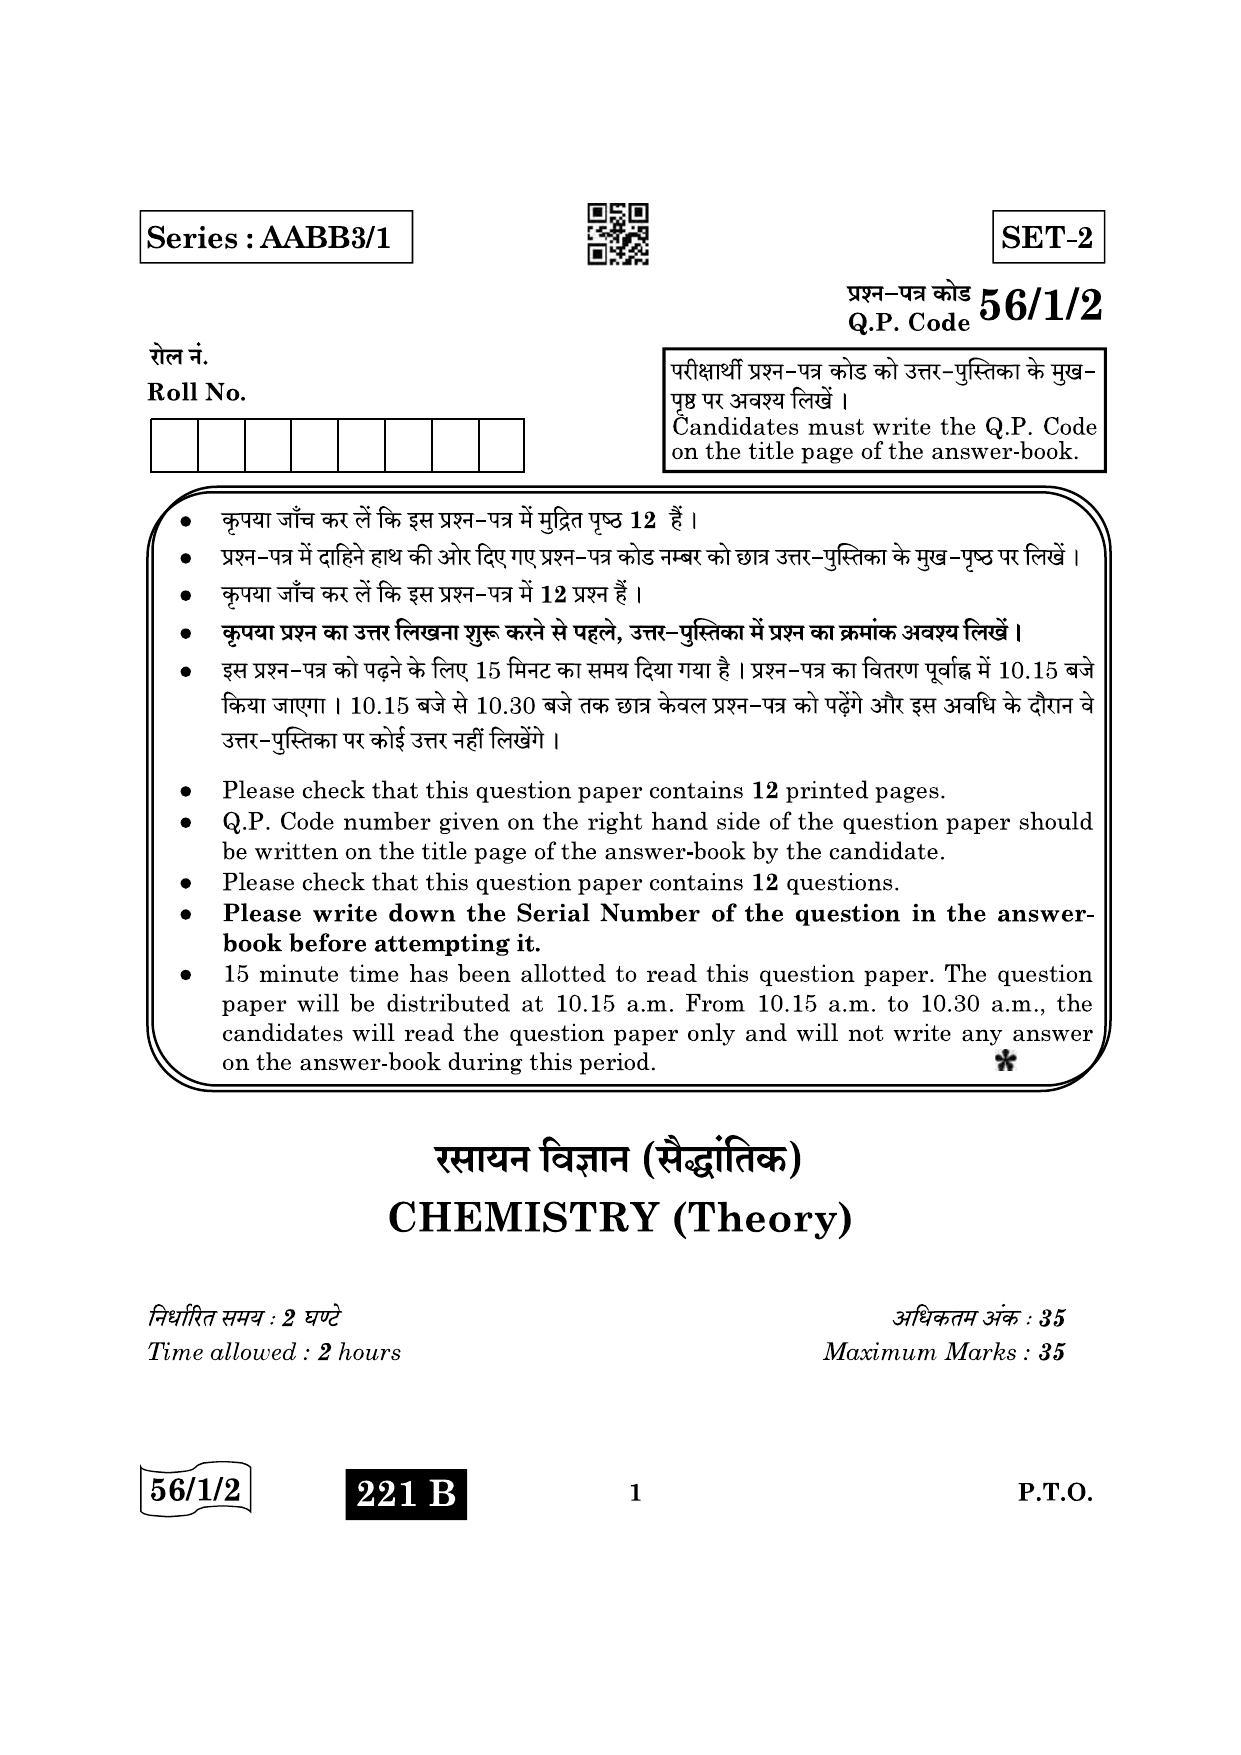 CBSE Class 12 56-1-2 Chemistry 2022 Question Paper - Page 1